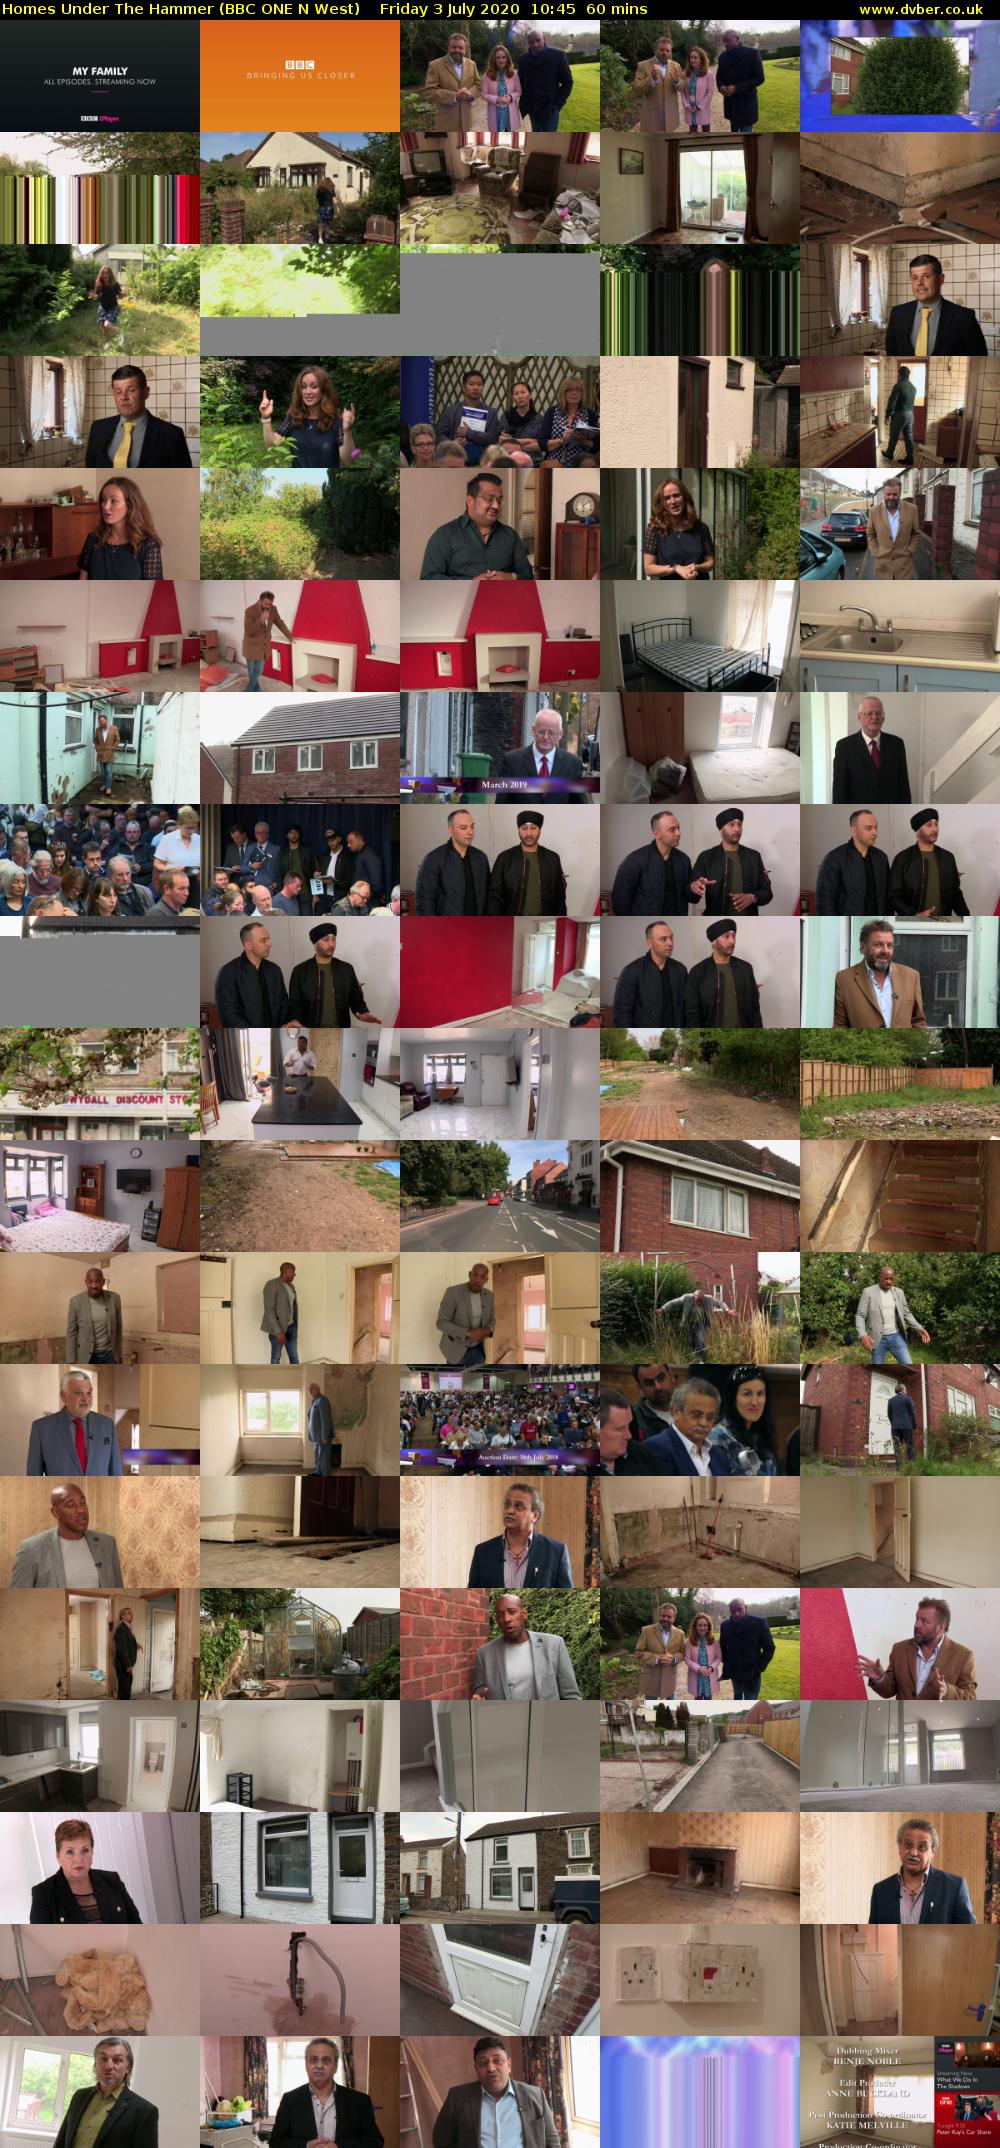 Homes Under The Hammer (BBC ONE N West) Friday 3 July 2020 10:45 - 11:45